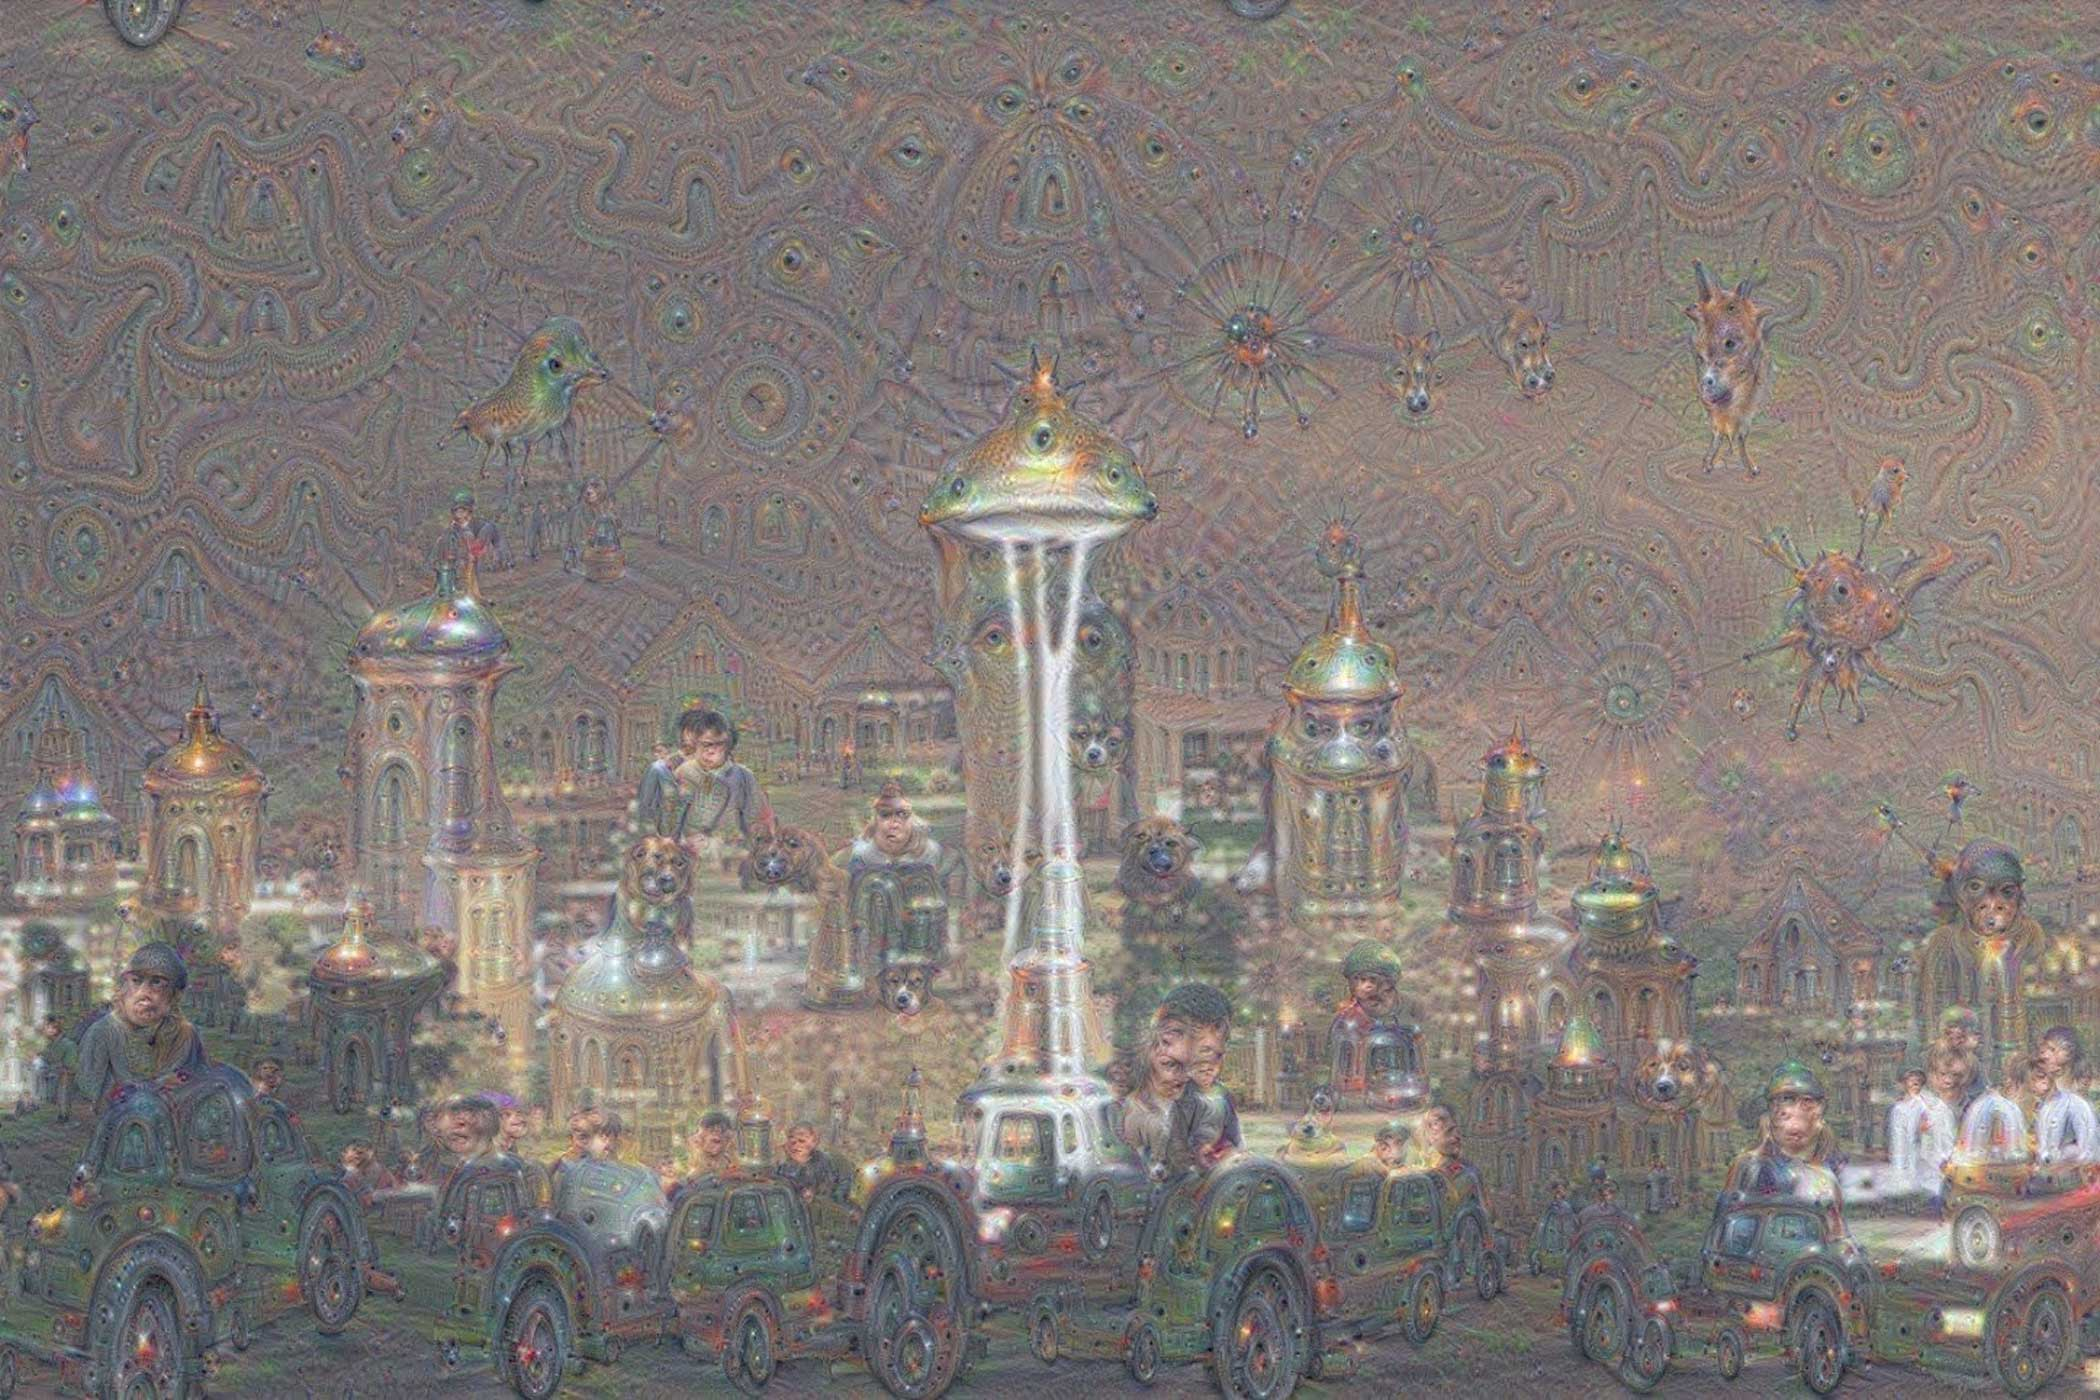 In addition to re-interpreting images, the network can create “dreams” from a random-noise image by continually building new impressions on top of its old ones